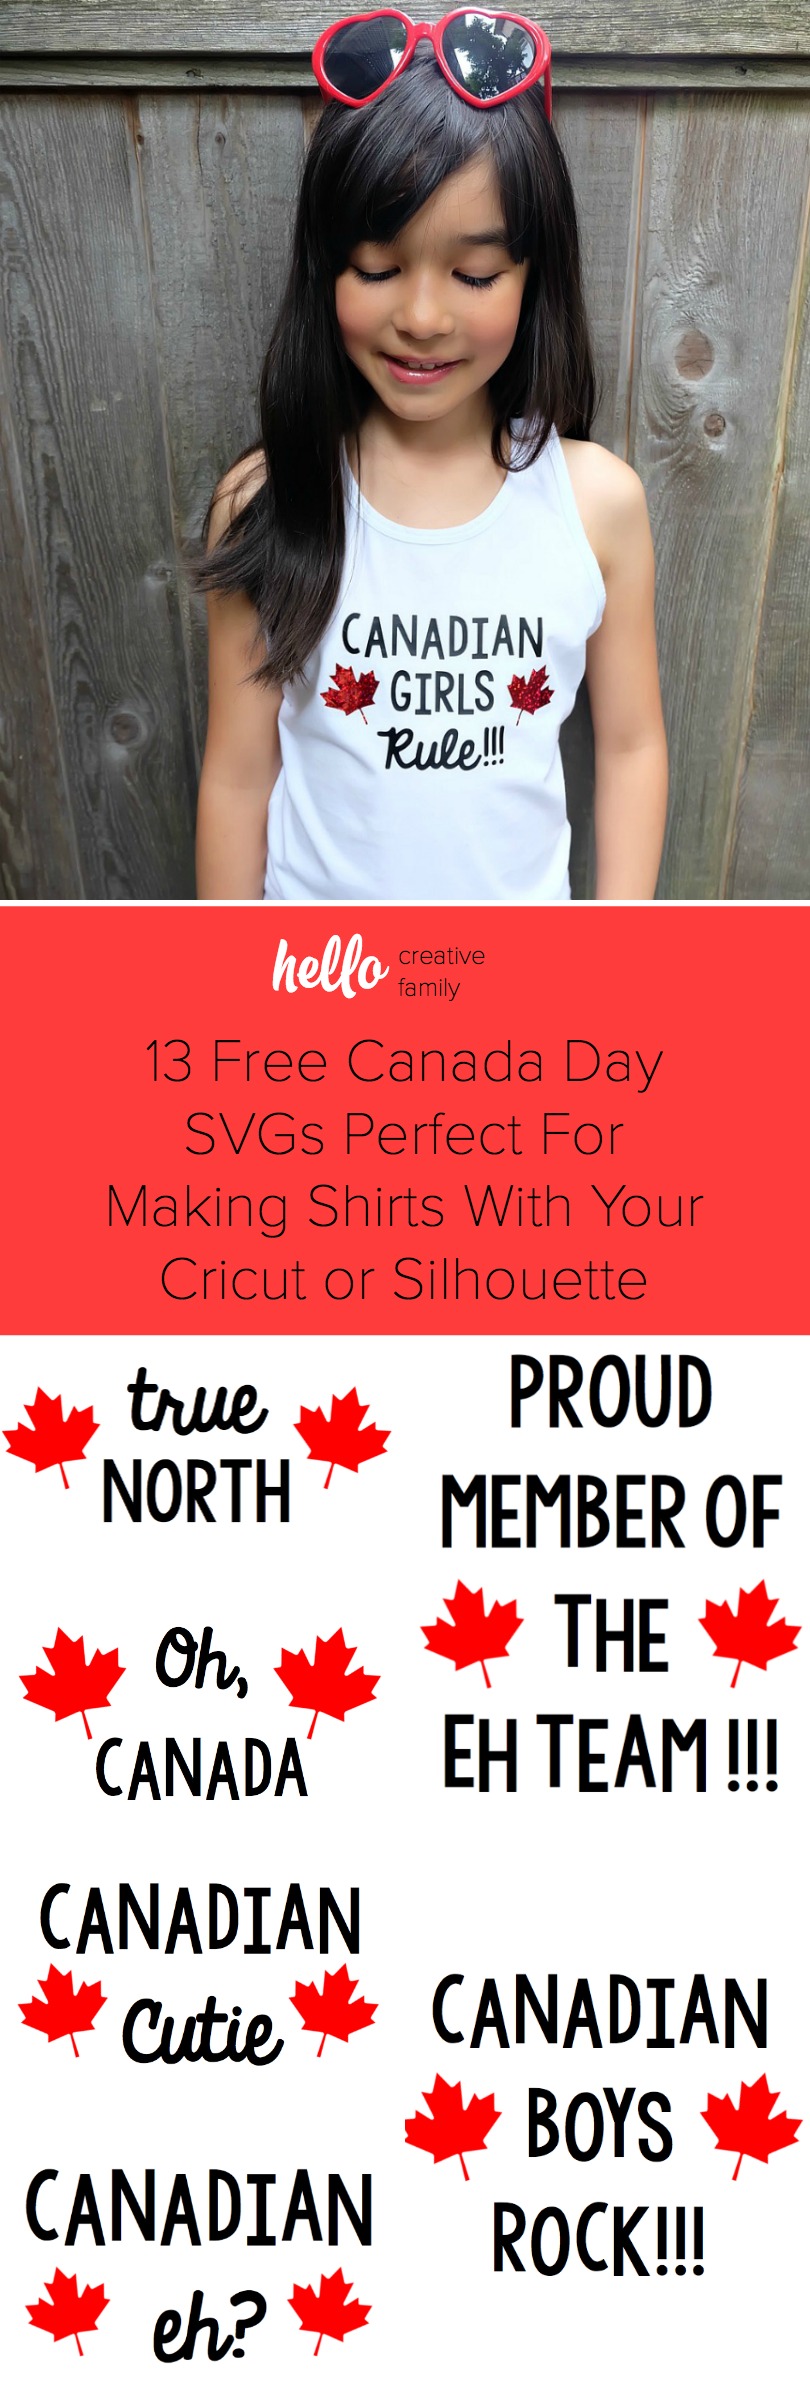 Get ready for Canada Day by making DIY custom shirts for your family and friends! We're sharing 13 Free Canada Day SVG Files that are perfect for making shirts with your Cricut or Silhouette! Get crafting! #CanadaDay #canada #cricut #silhouette